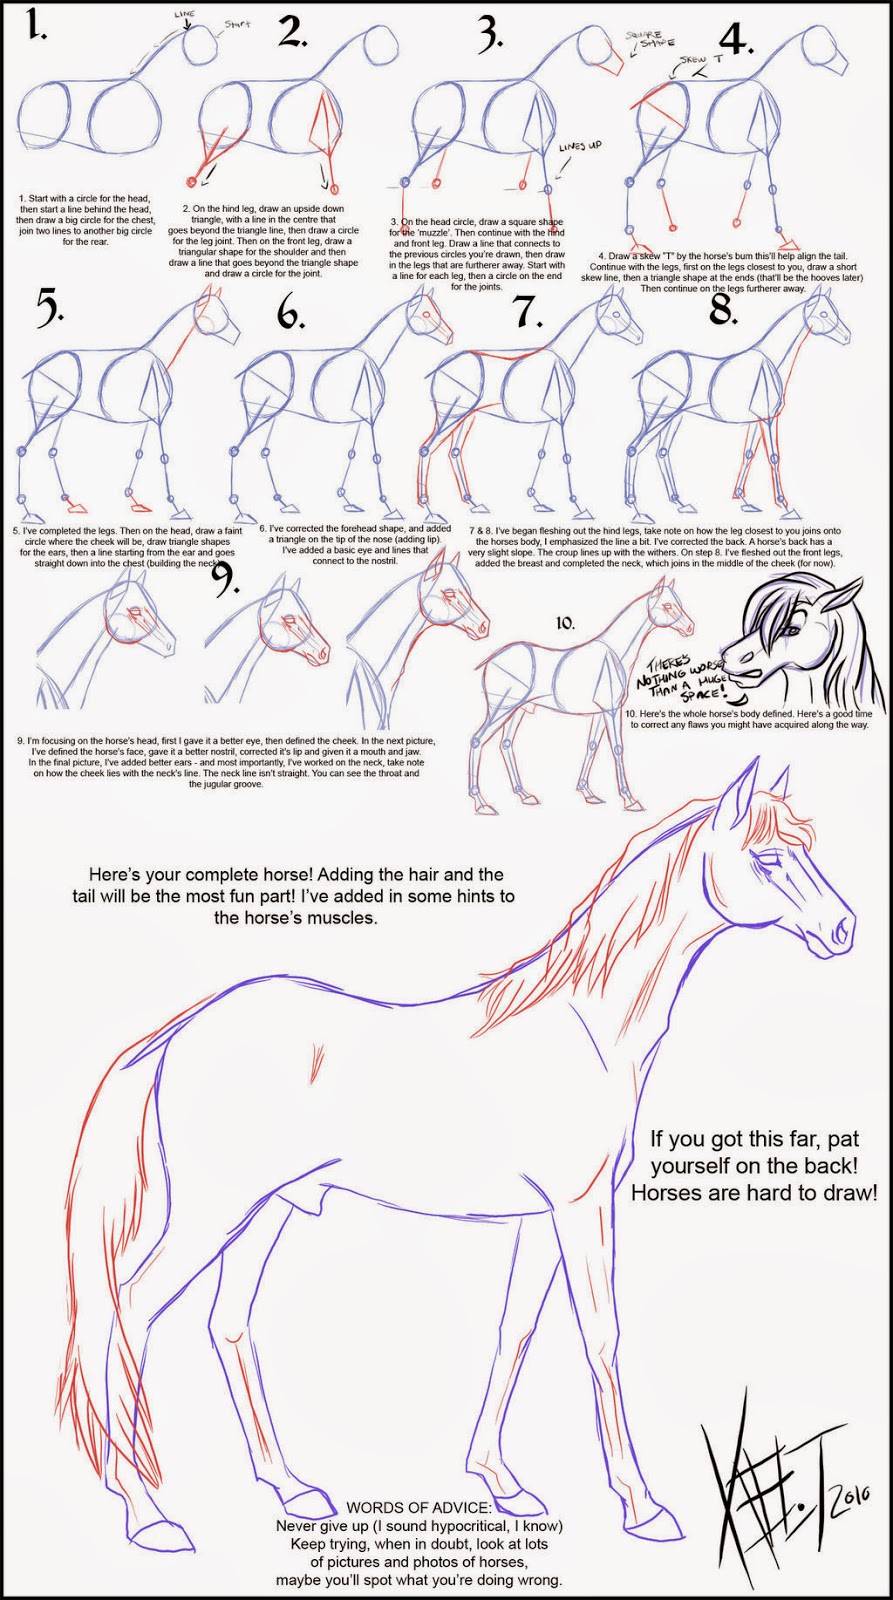 SERIOUSLY HORSING AROUND: Fun graphic on HOW TO DRAW A HORSE